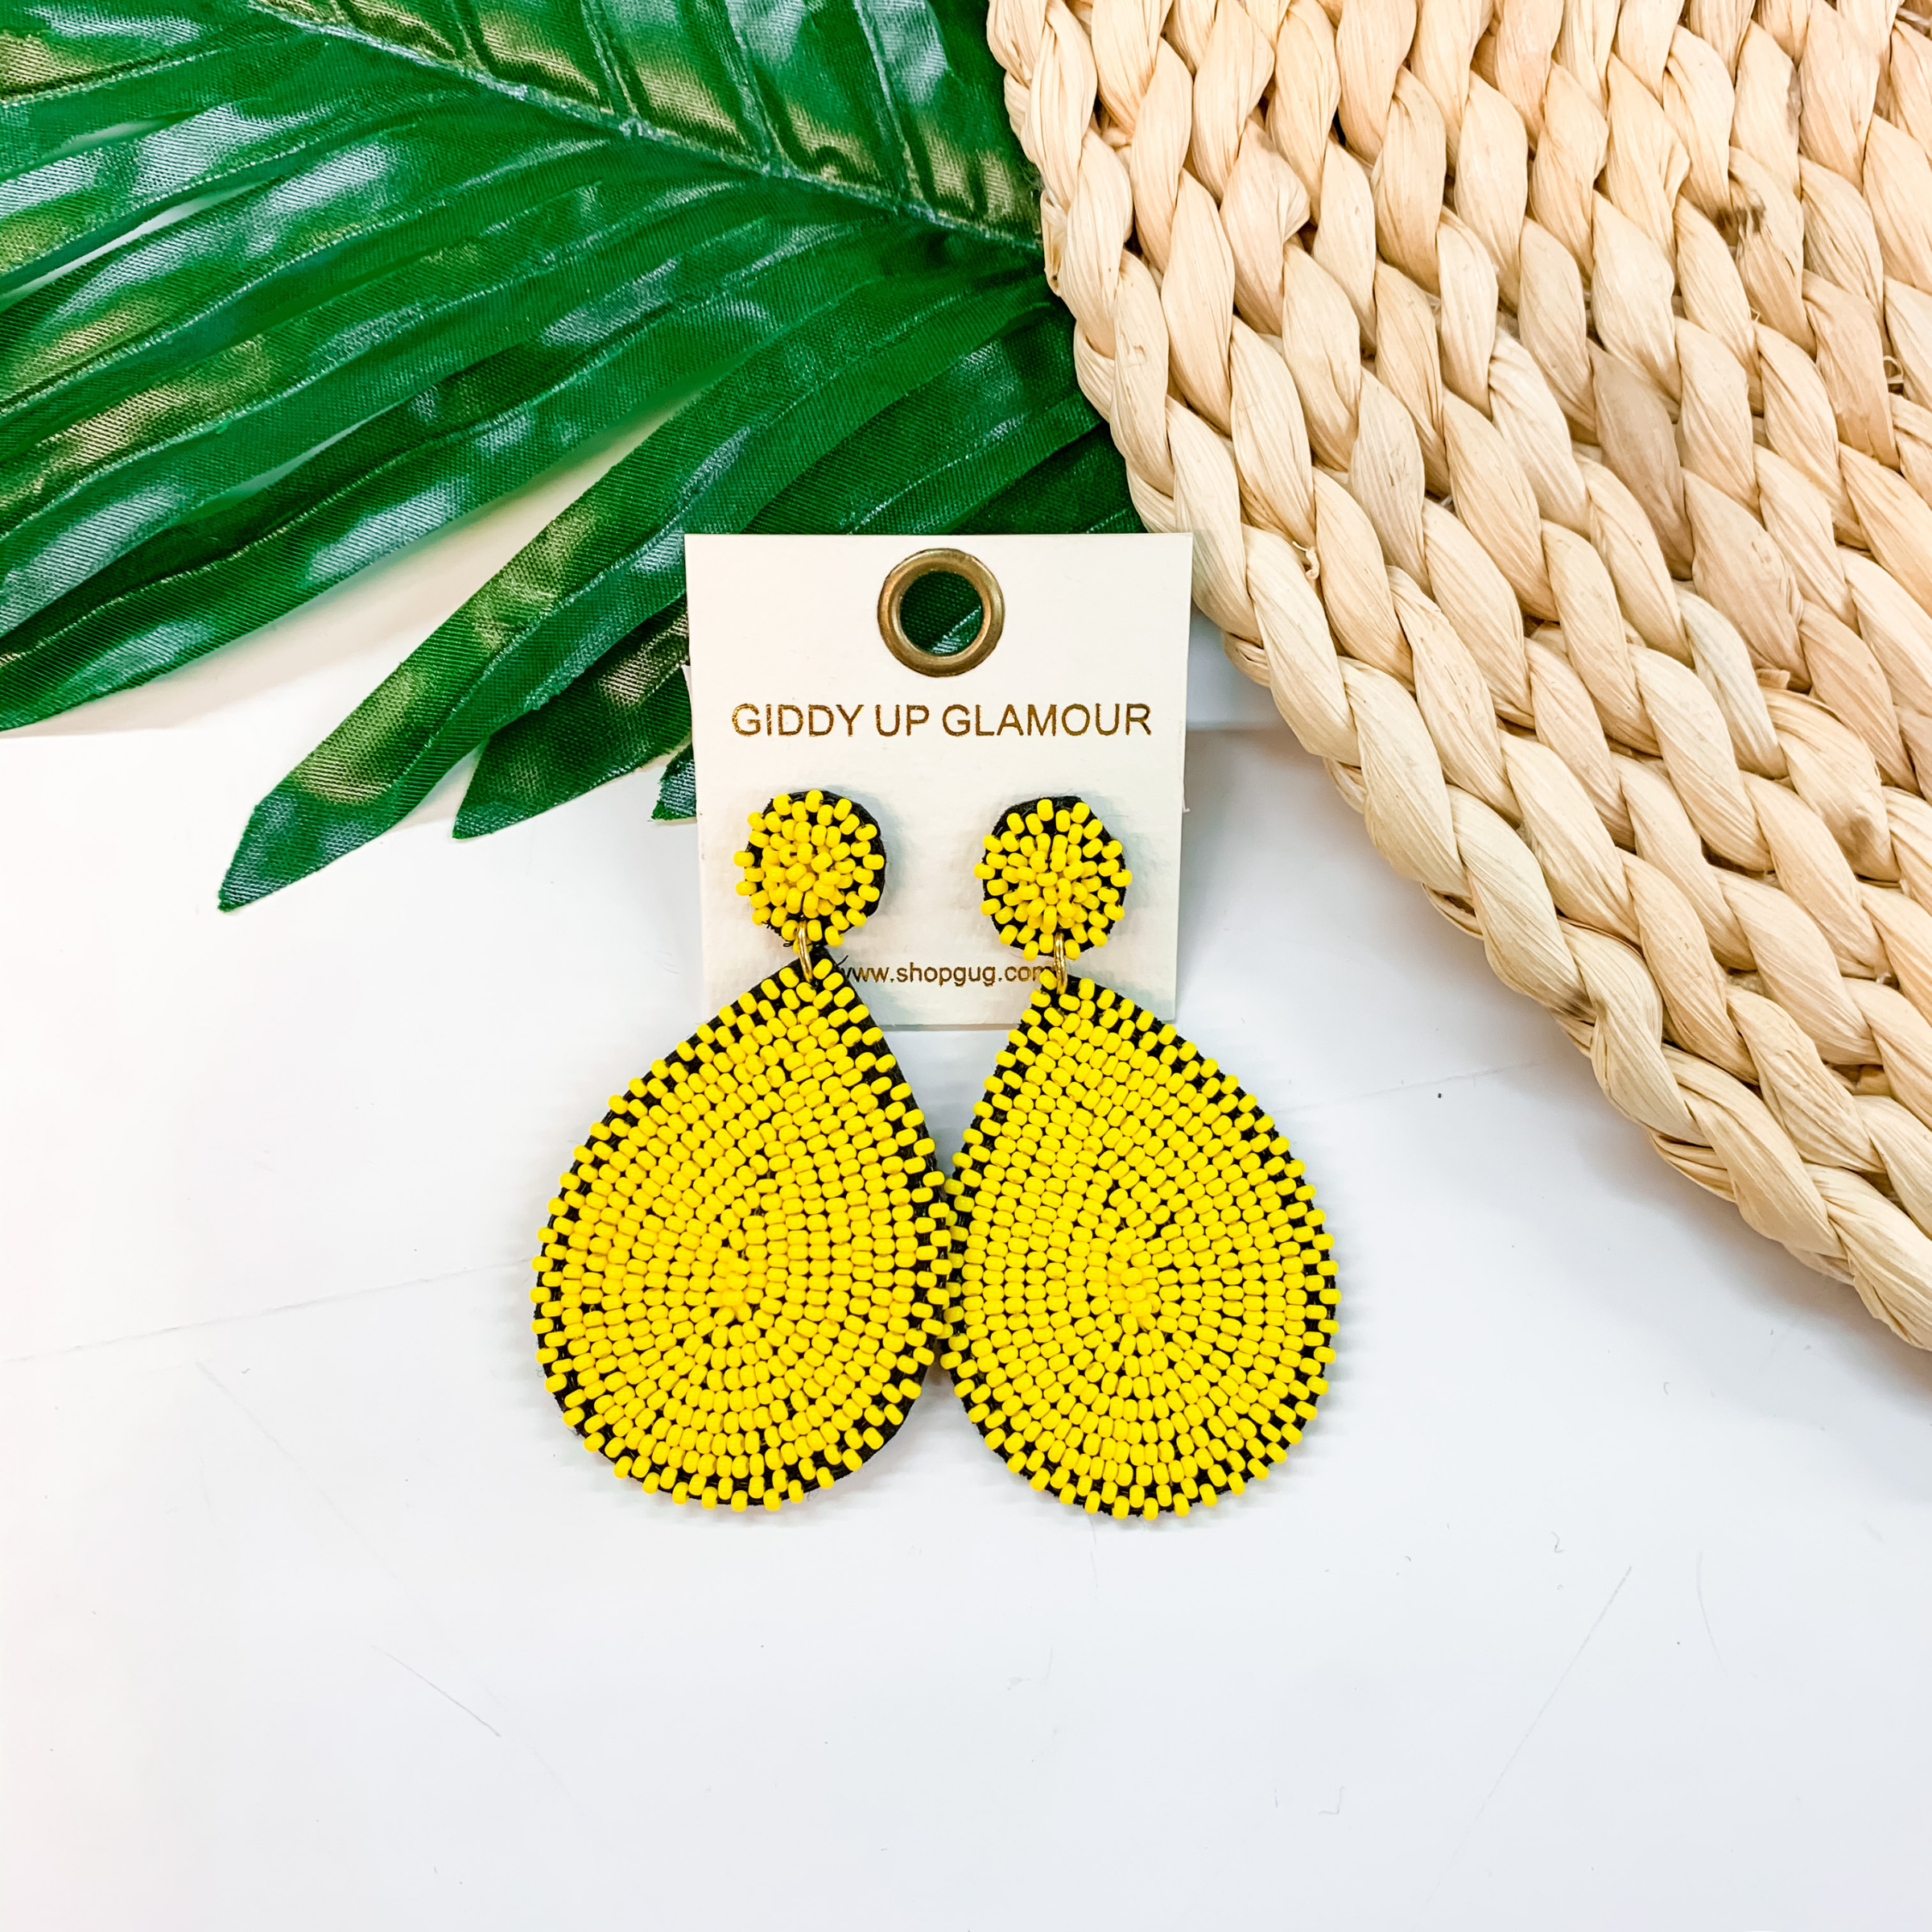 Seed Bead Teardrop Earrings In Yellow - Giddy Up Glamour Boutique